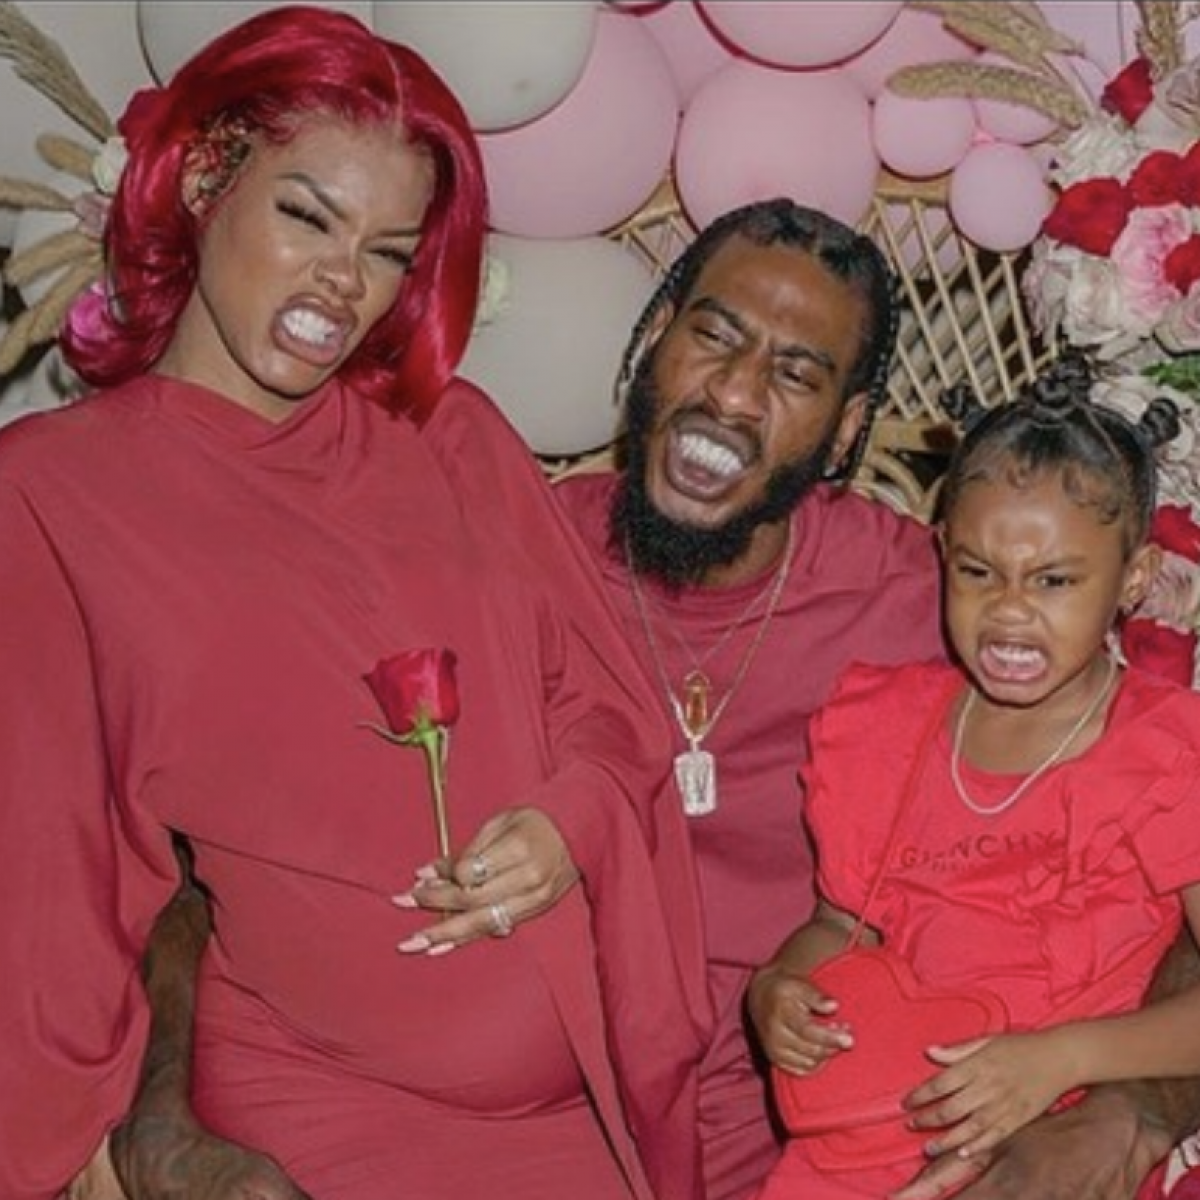 This Week In Black Love: Teyana and Iman Love Their New Family Of 4 & More